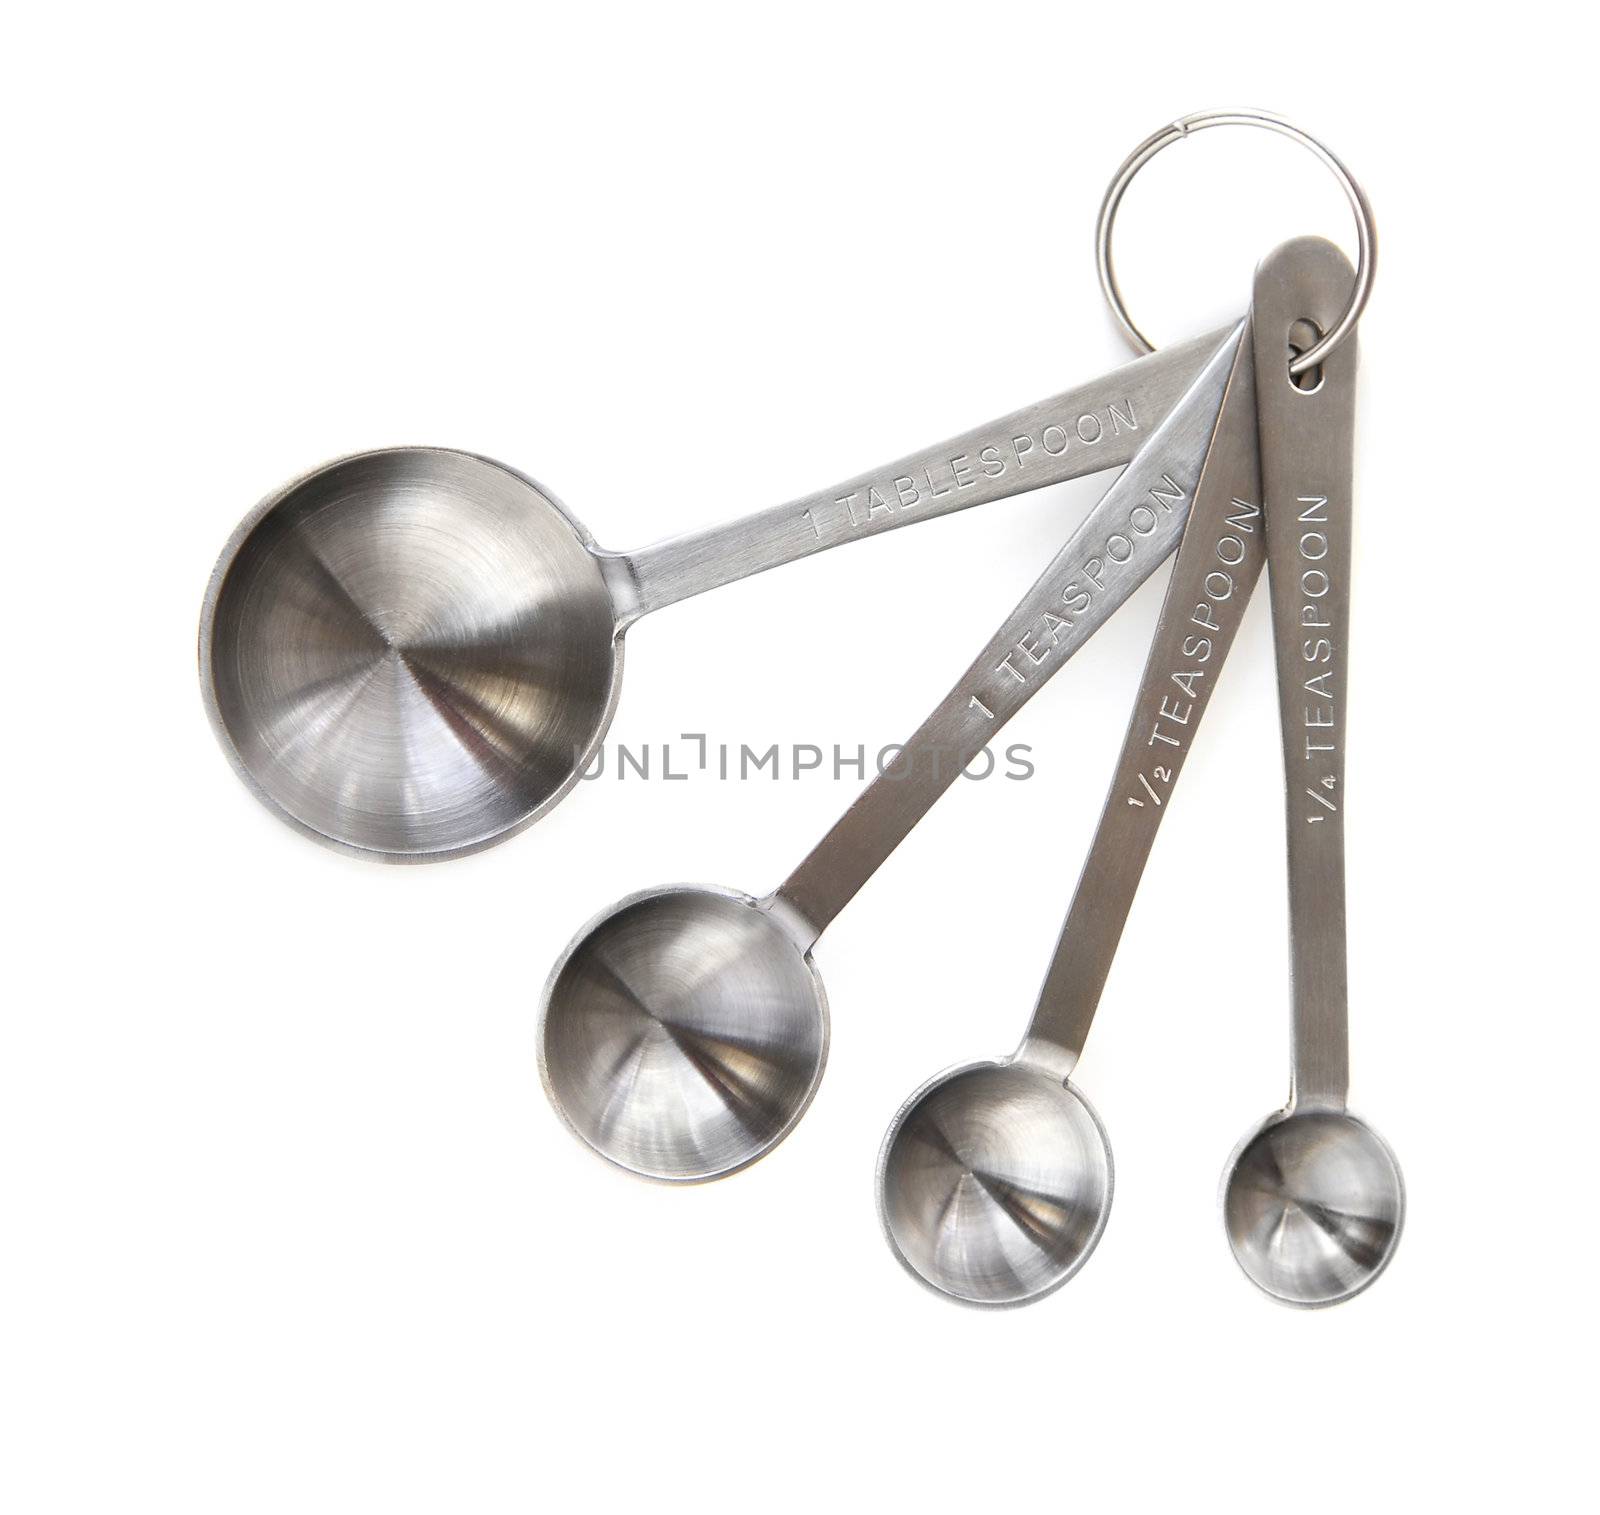 Measuring spoons by elenathewise